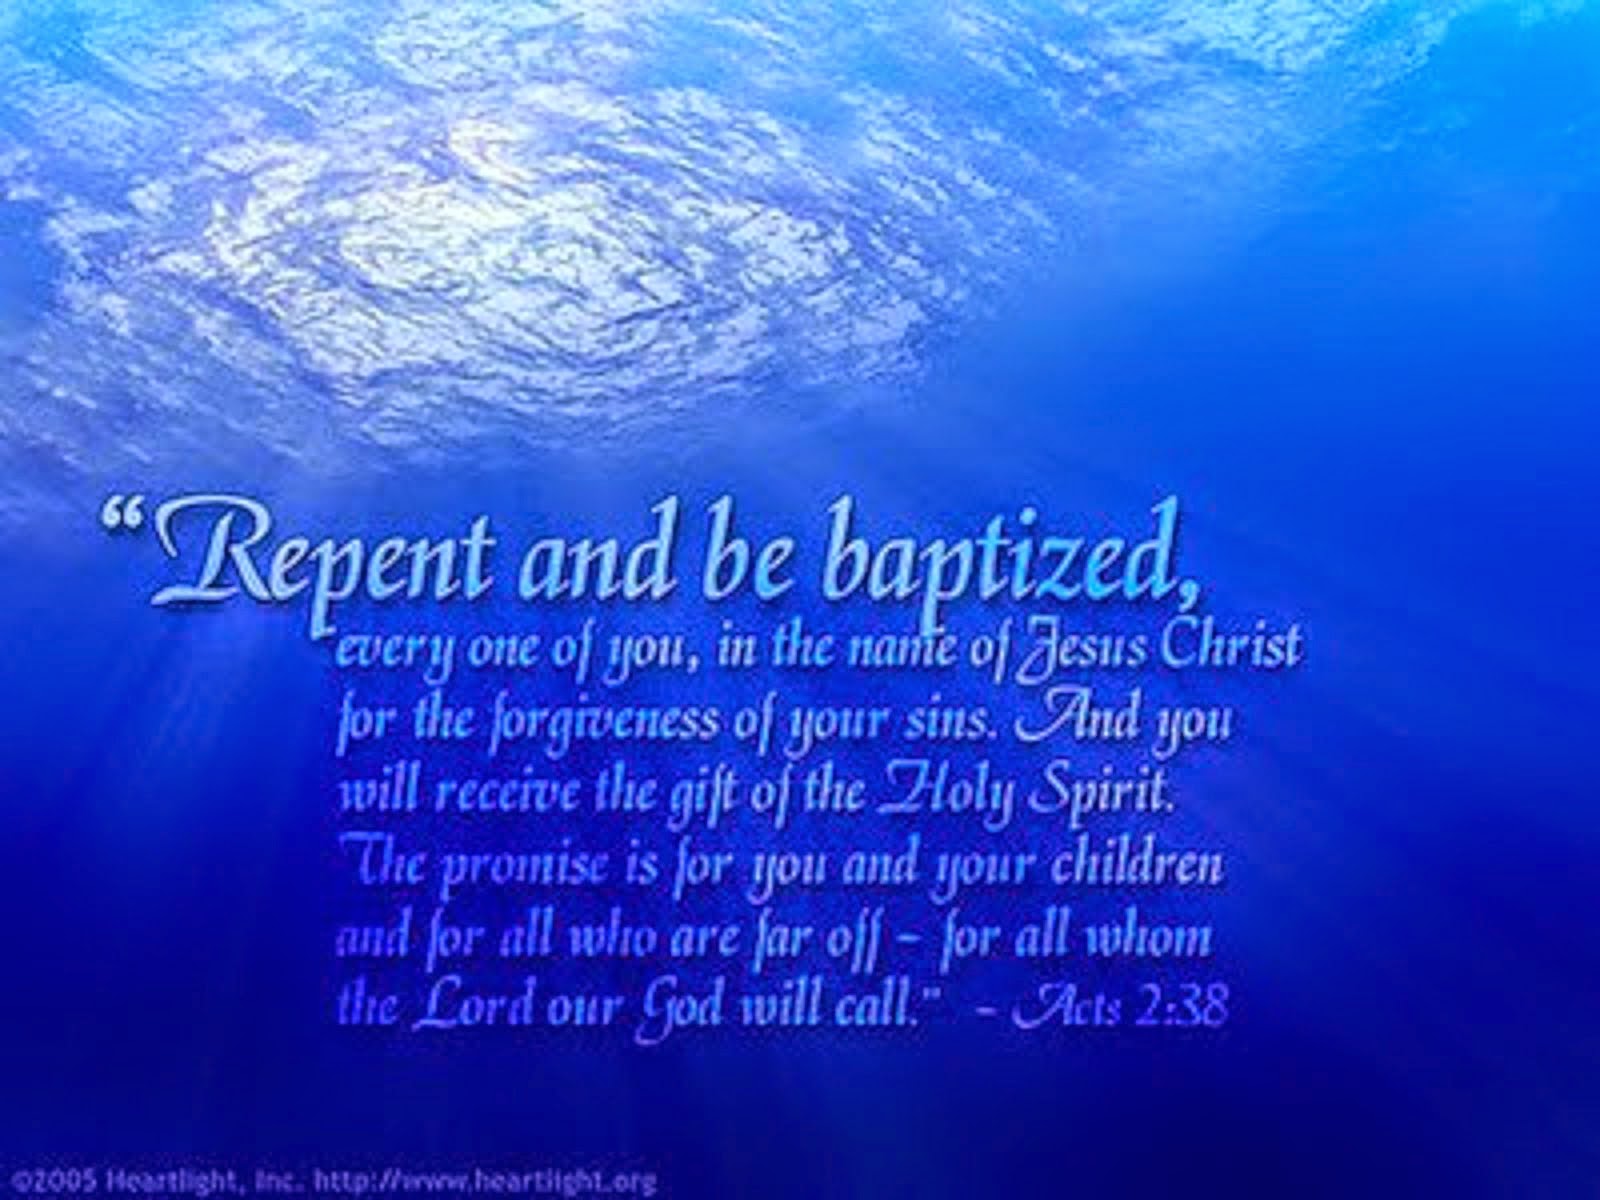 REPENT AND BE BAPTIZED